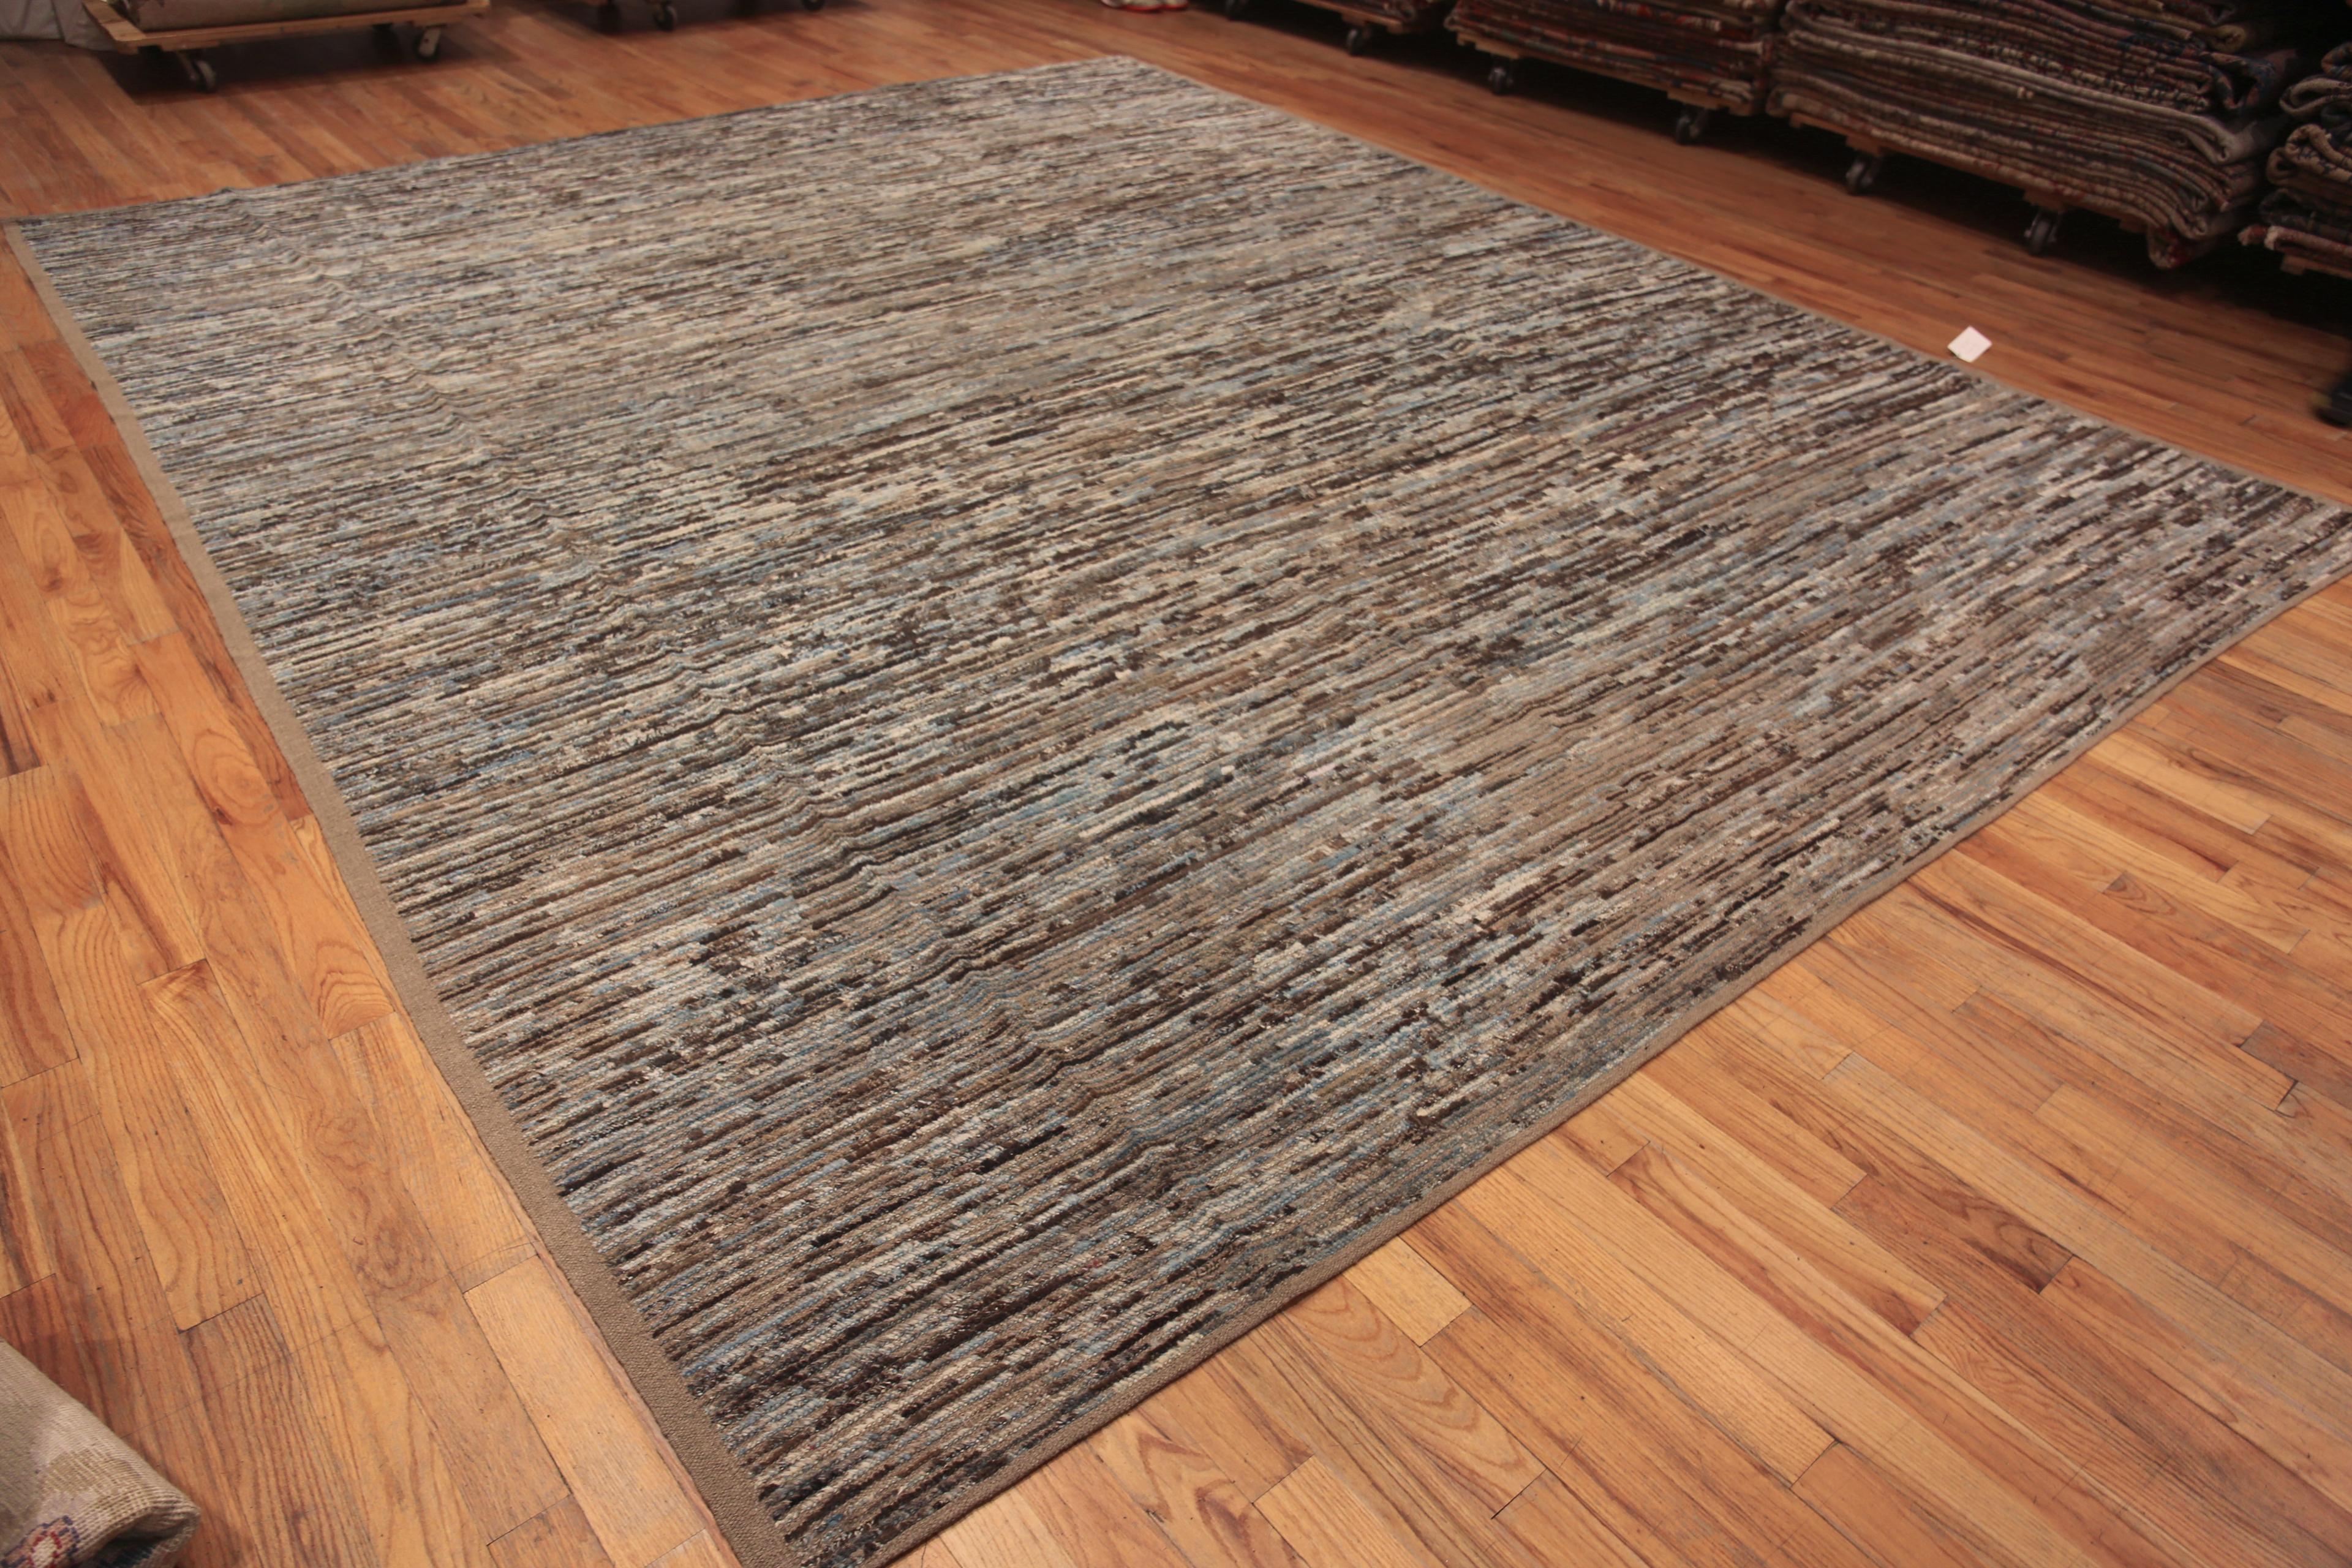 Beautifully Artistic Earthy Brown and Blue Color Abstract Contemporary Design Large Modern Room Size Area Rug, Country of Origin: Central Asia, Circa Date: Modern Rug 